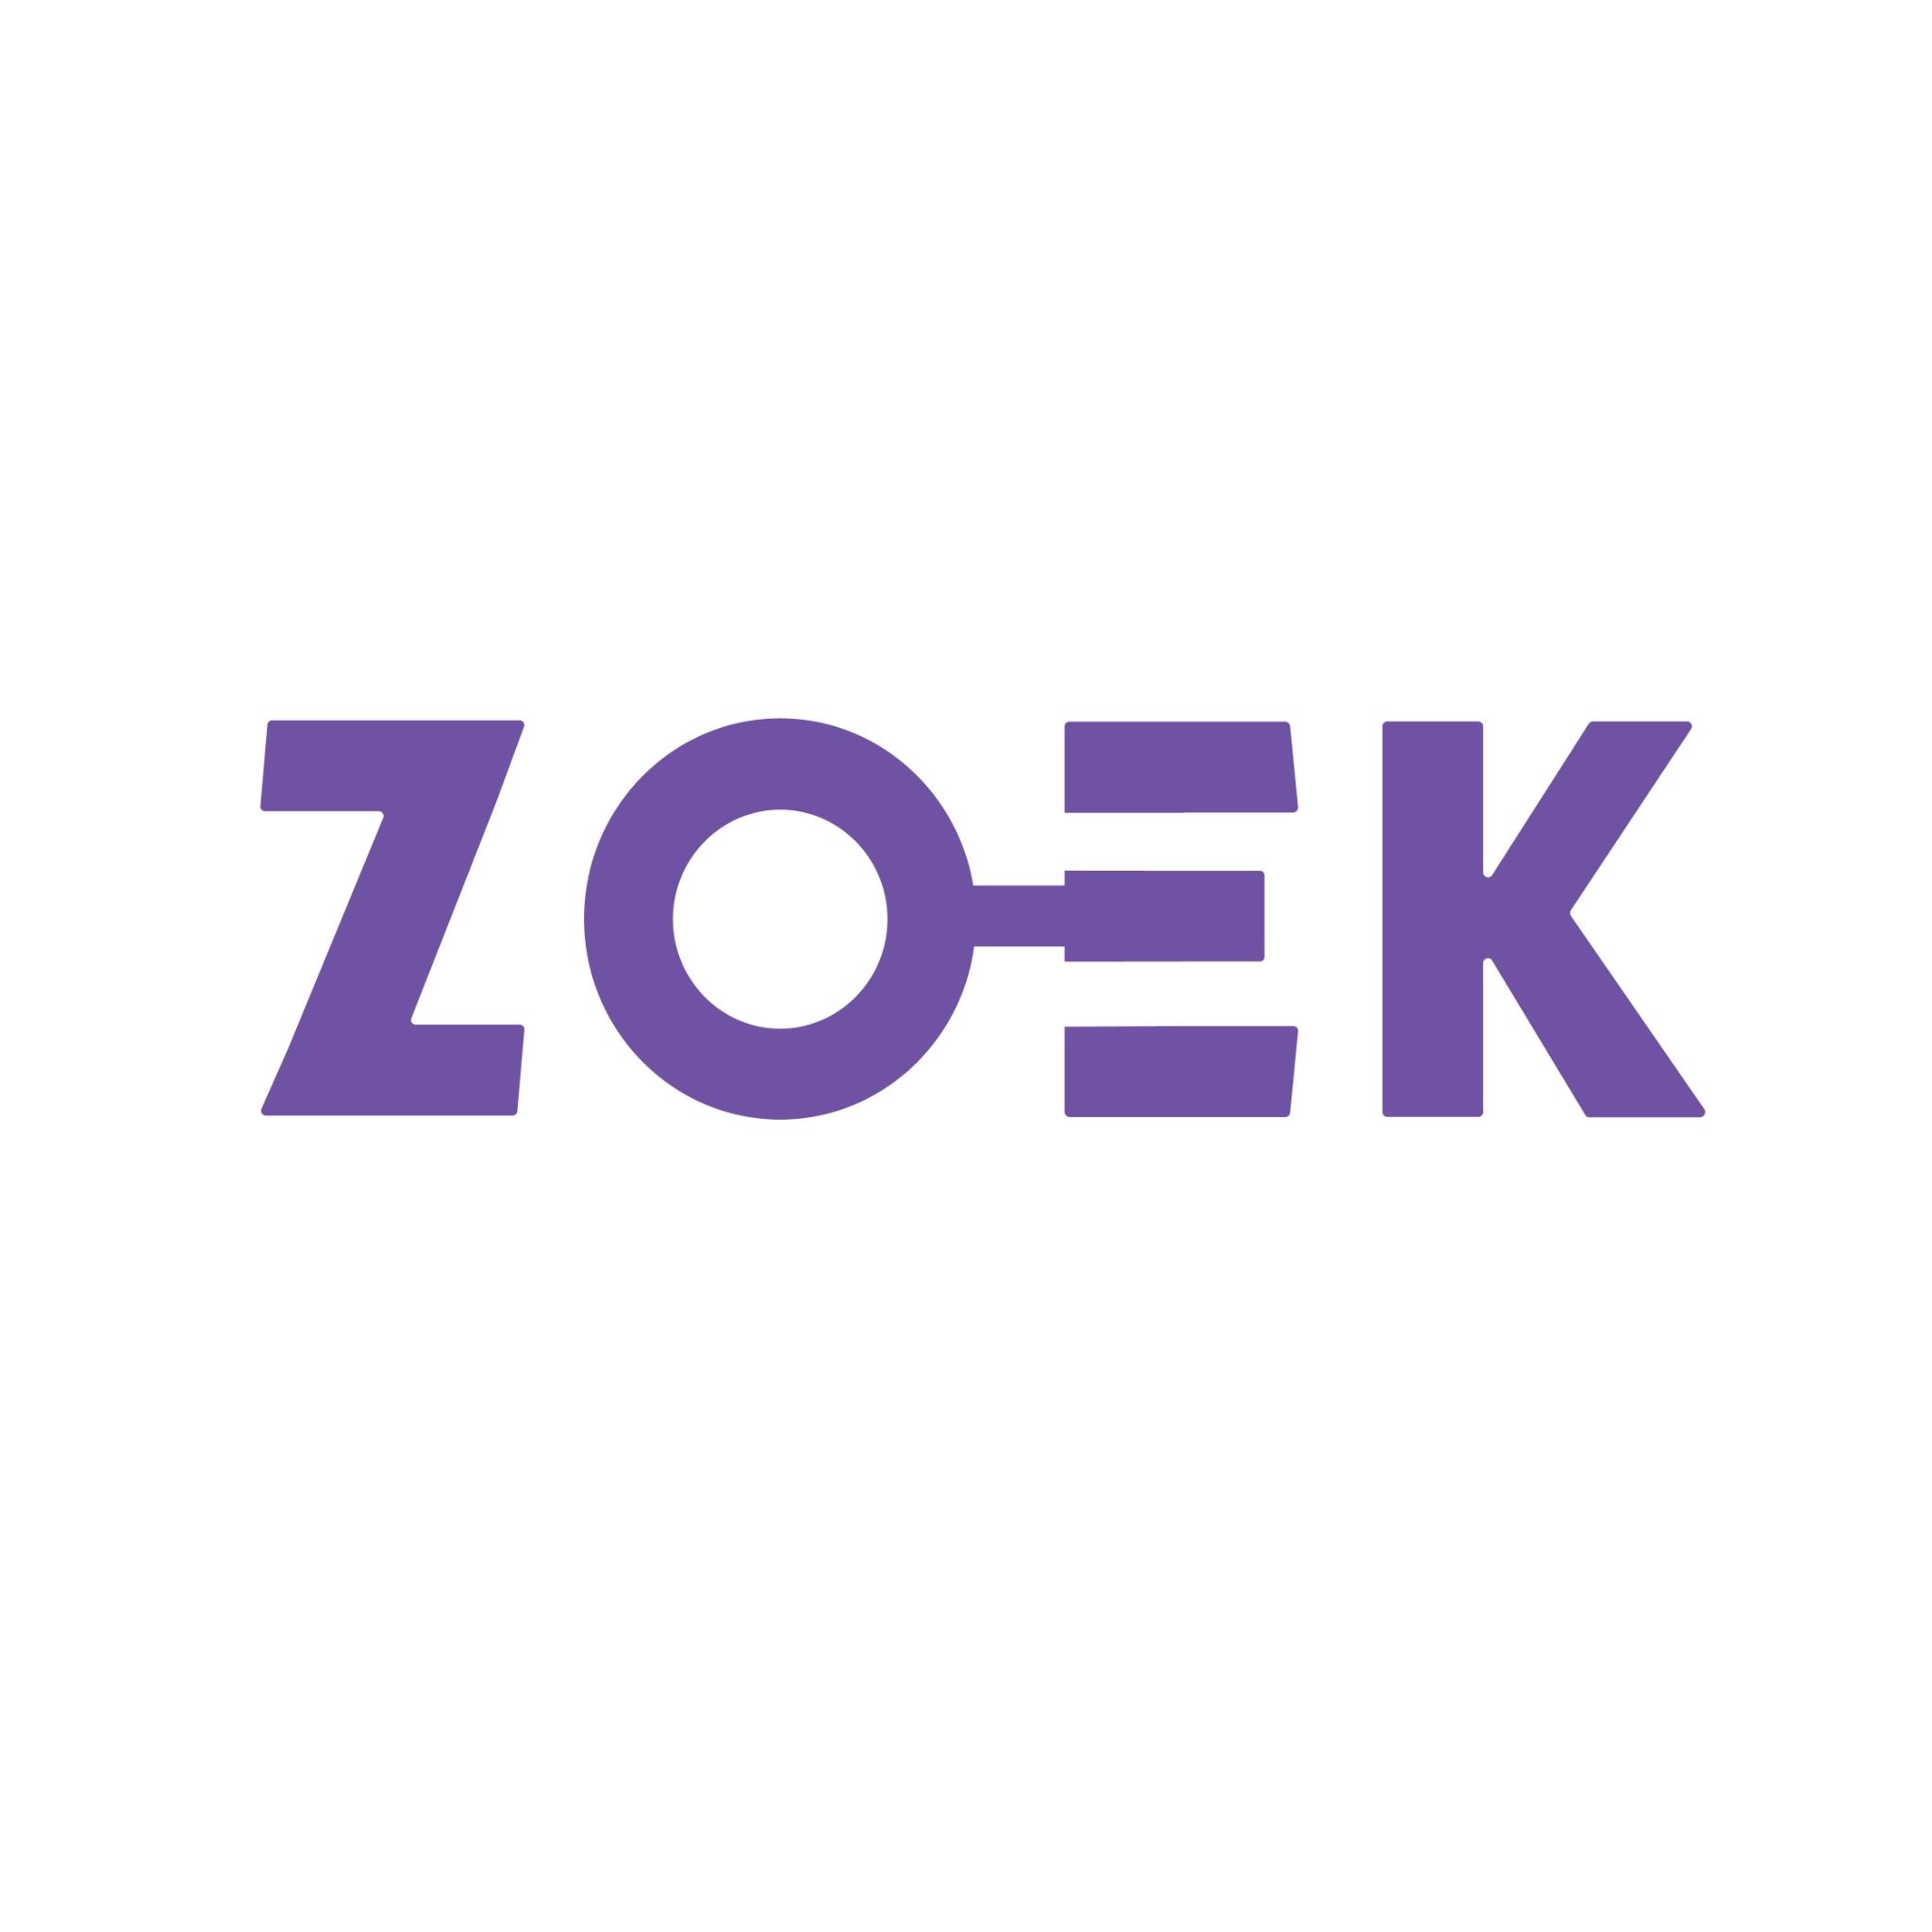 Zoek Marketing shars why small business owners should consider SEO from the Start